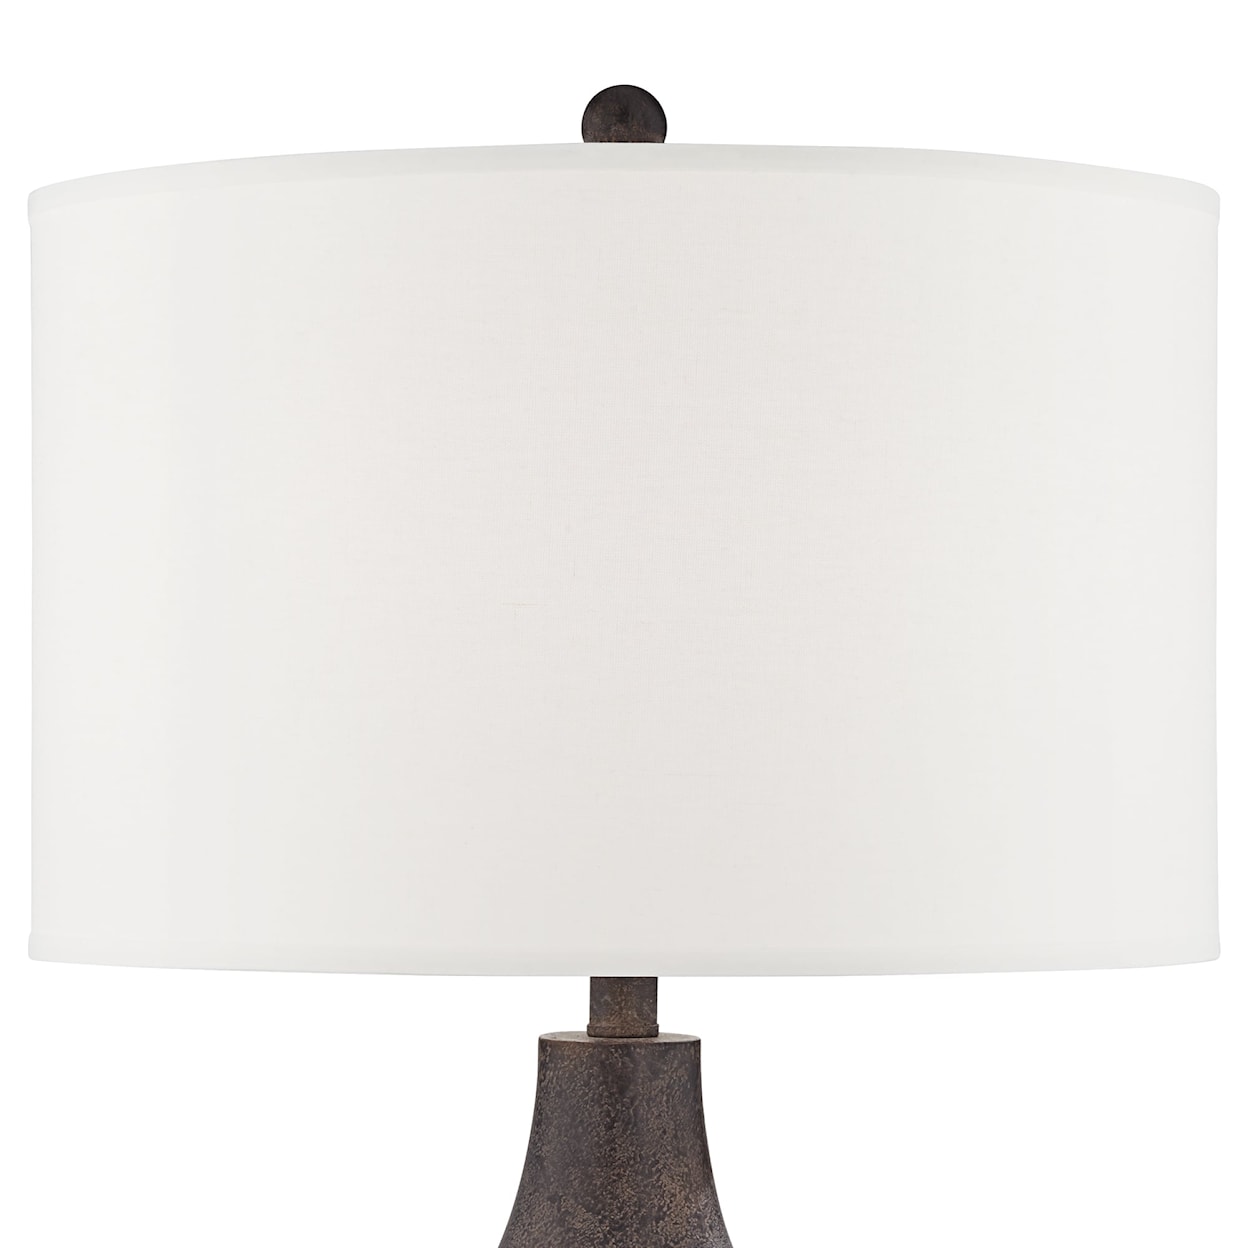 Pacific Coast Lighting Pacific Coast Lighting TL-Poly with geometric patterns